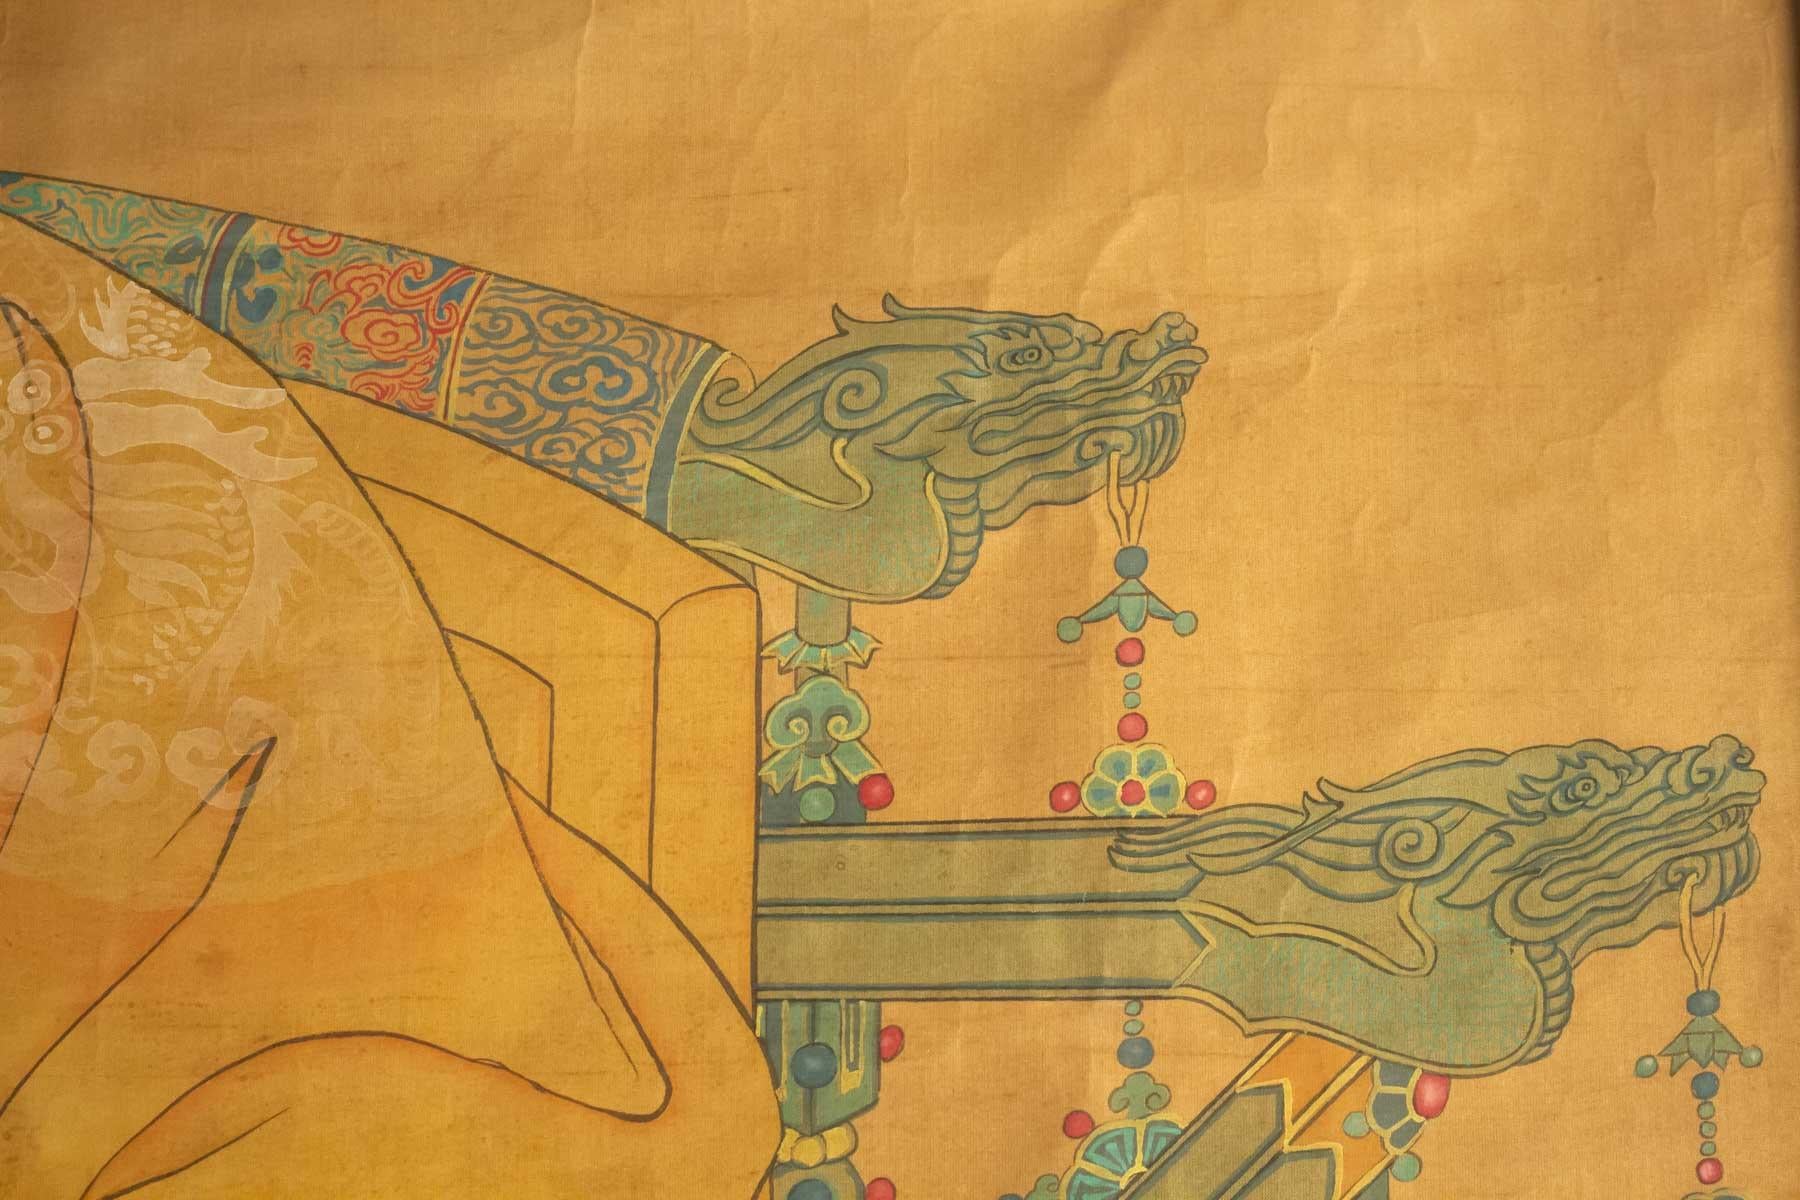 Asian Portrait of Emperor Yongle on His Throne, Painting on Fabric, Early 20th Century